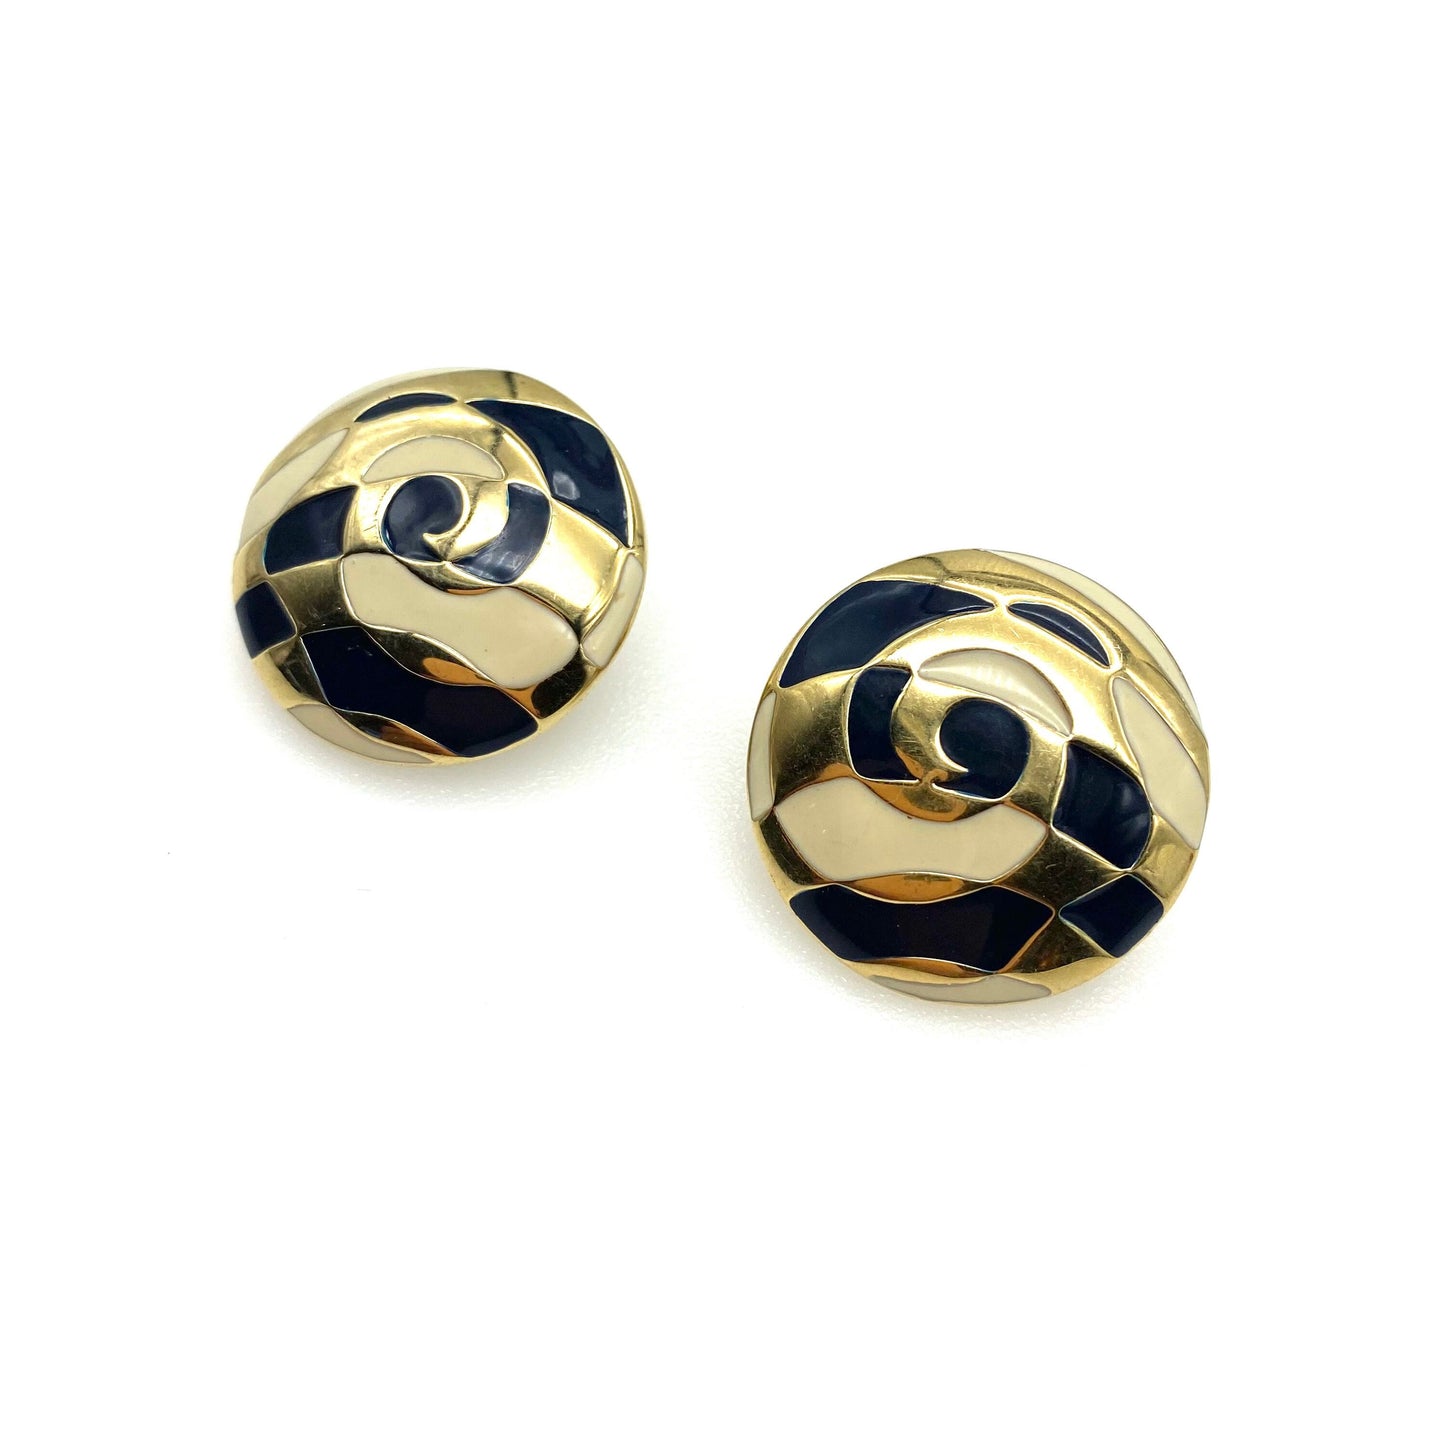 Signed Gold Tone Black and Cream Enamel Abstract Mod Clip On Earrings